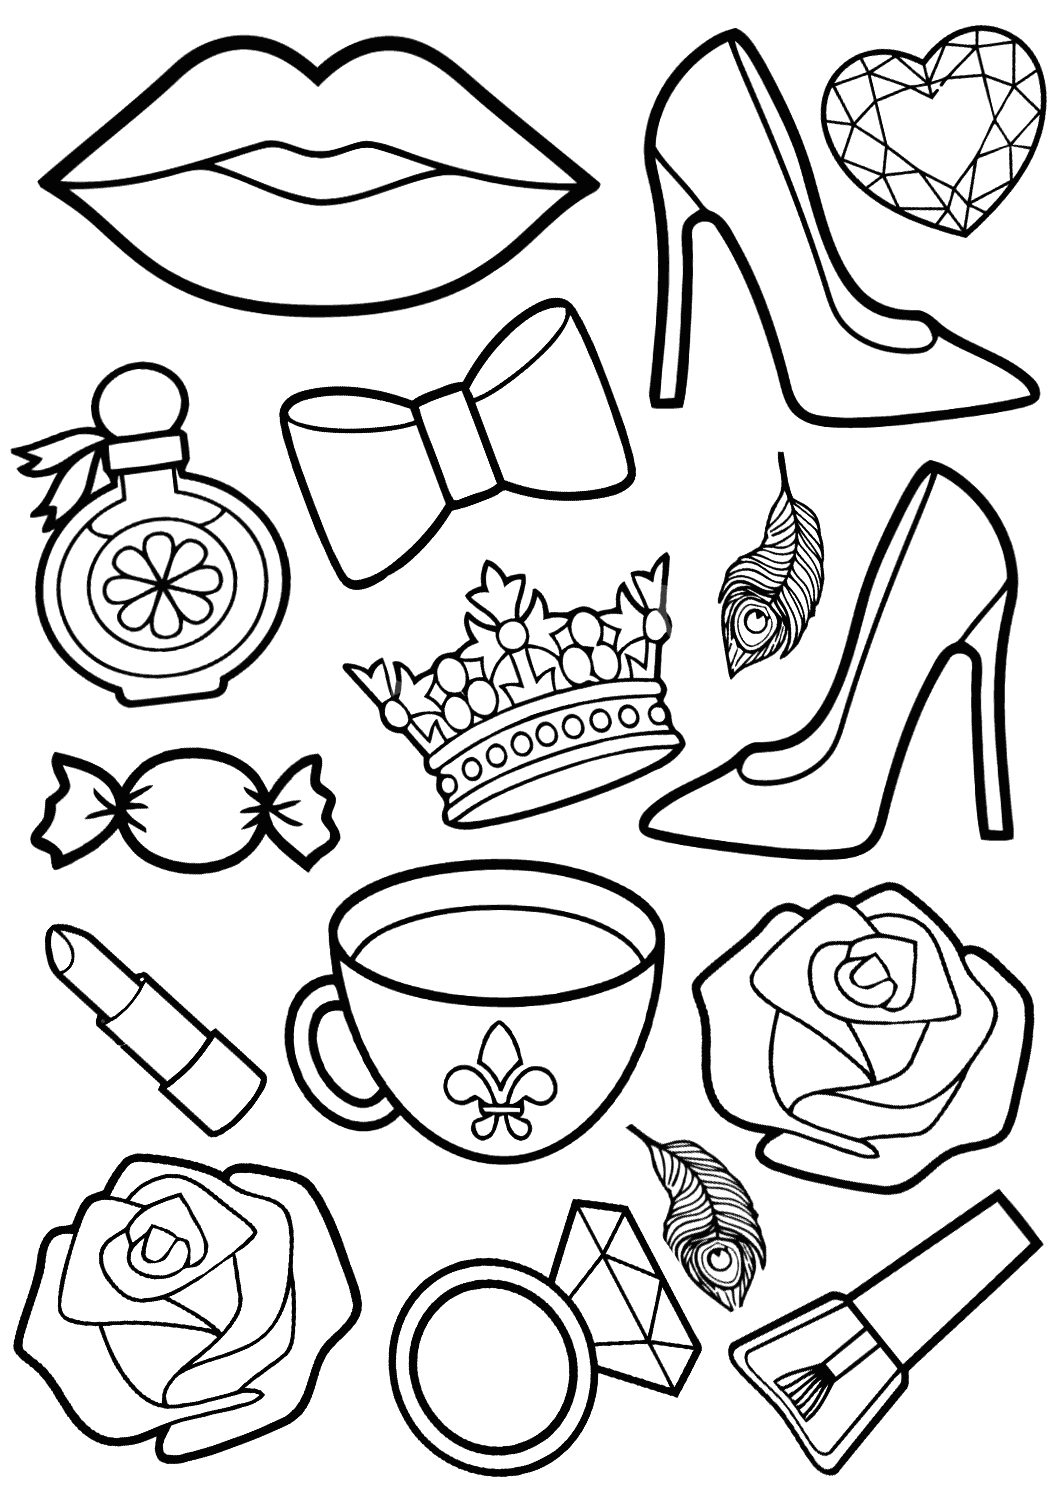 Stickers coloring pages | Coloring pages to download and print